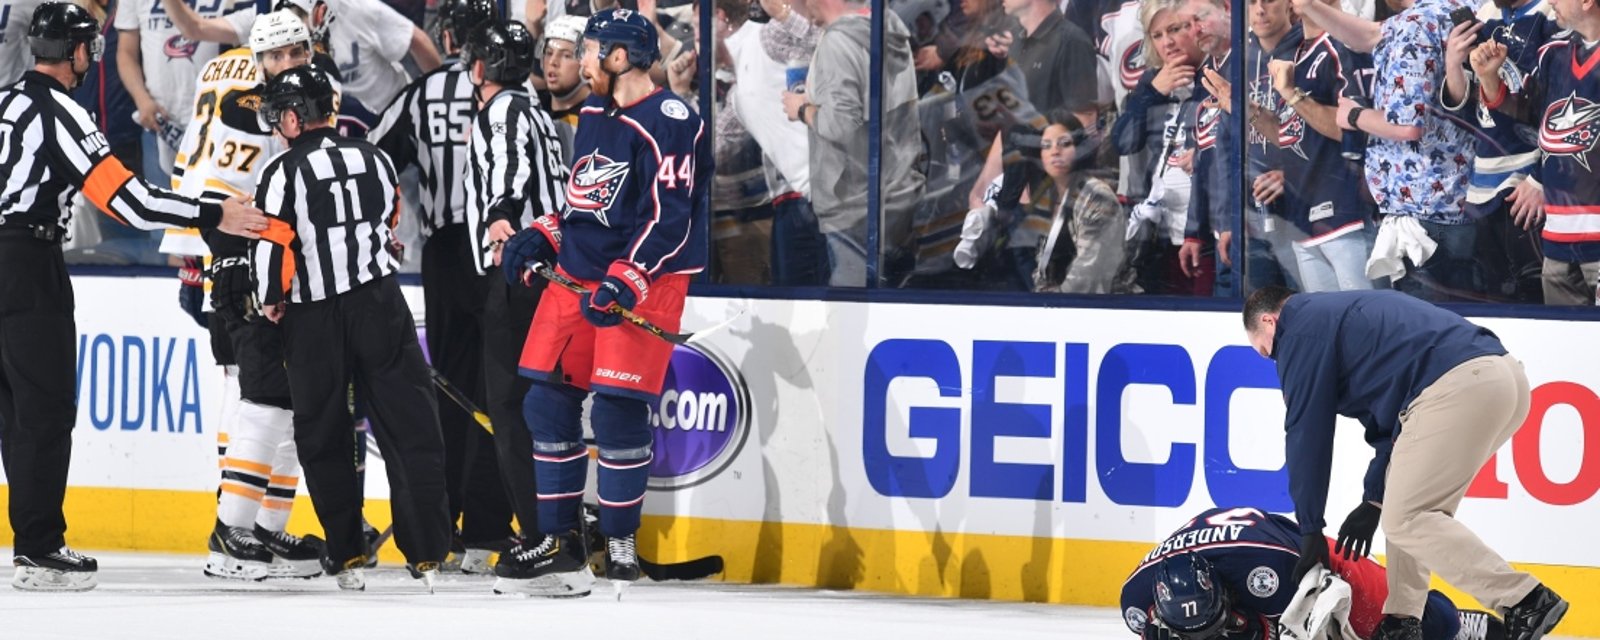 NHL makes controversial move with referees from BOS/CBJ series